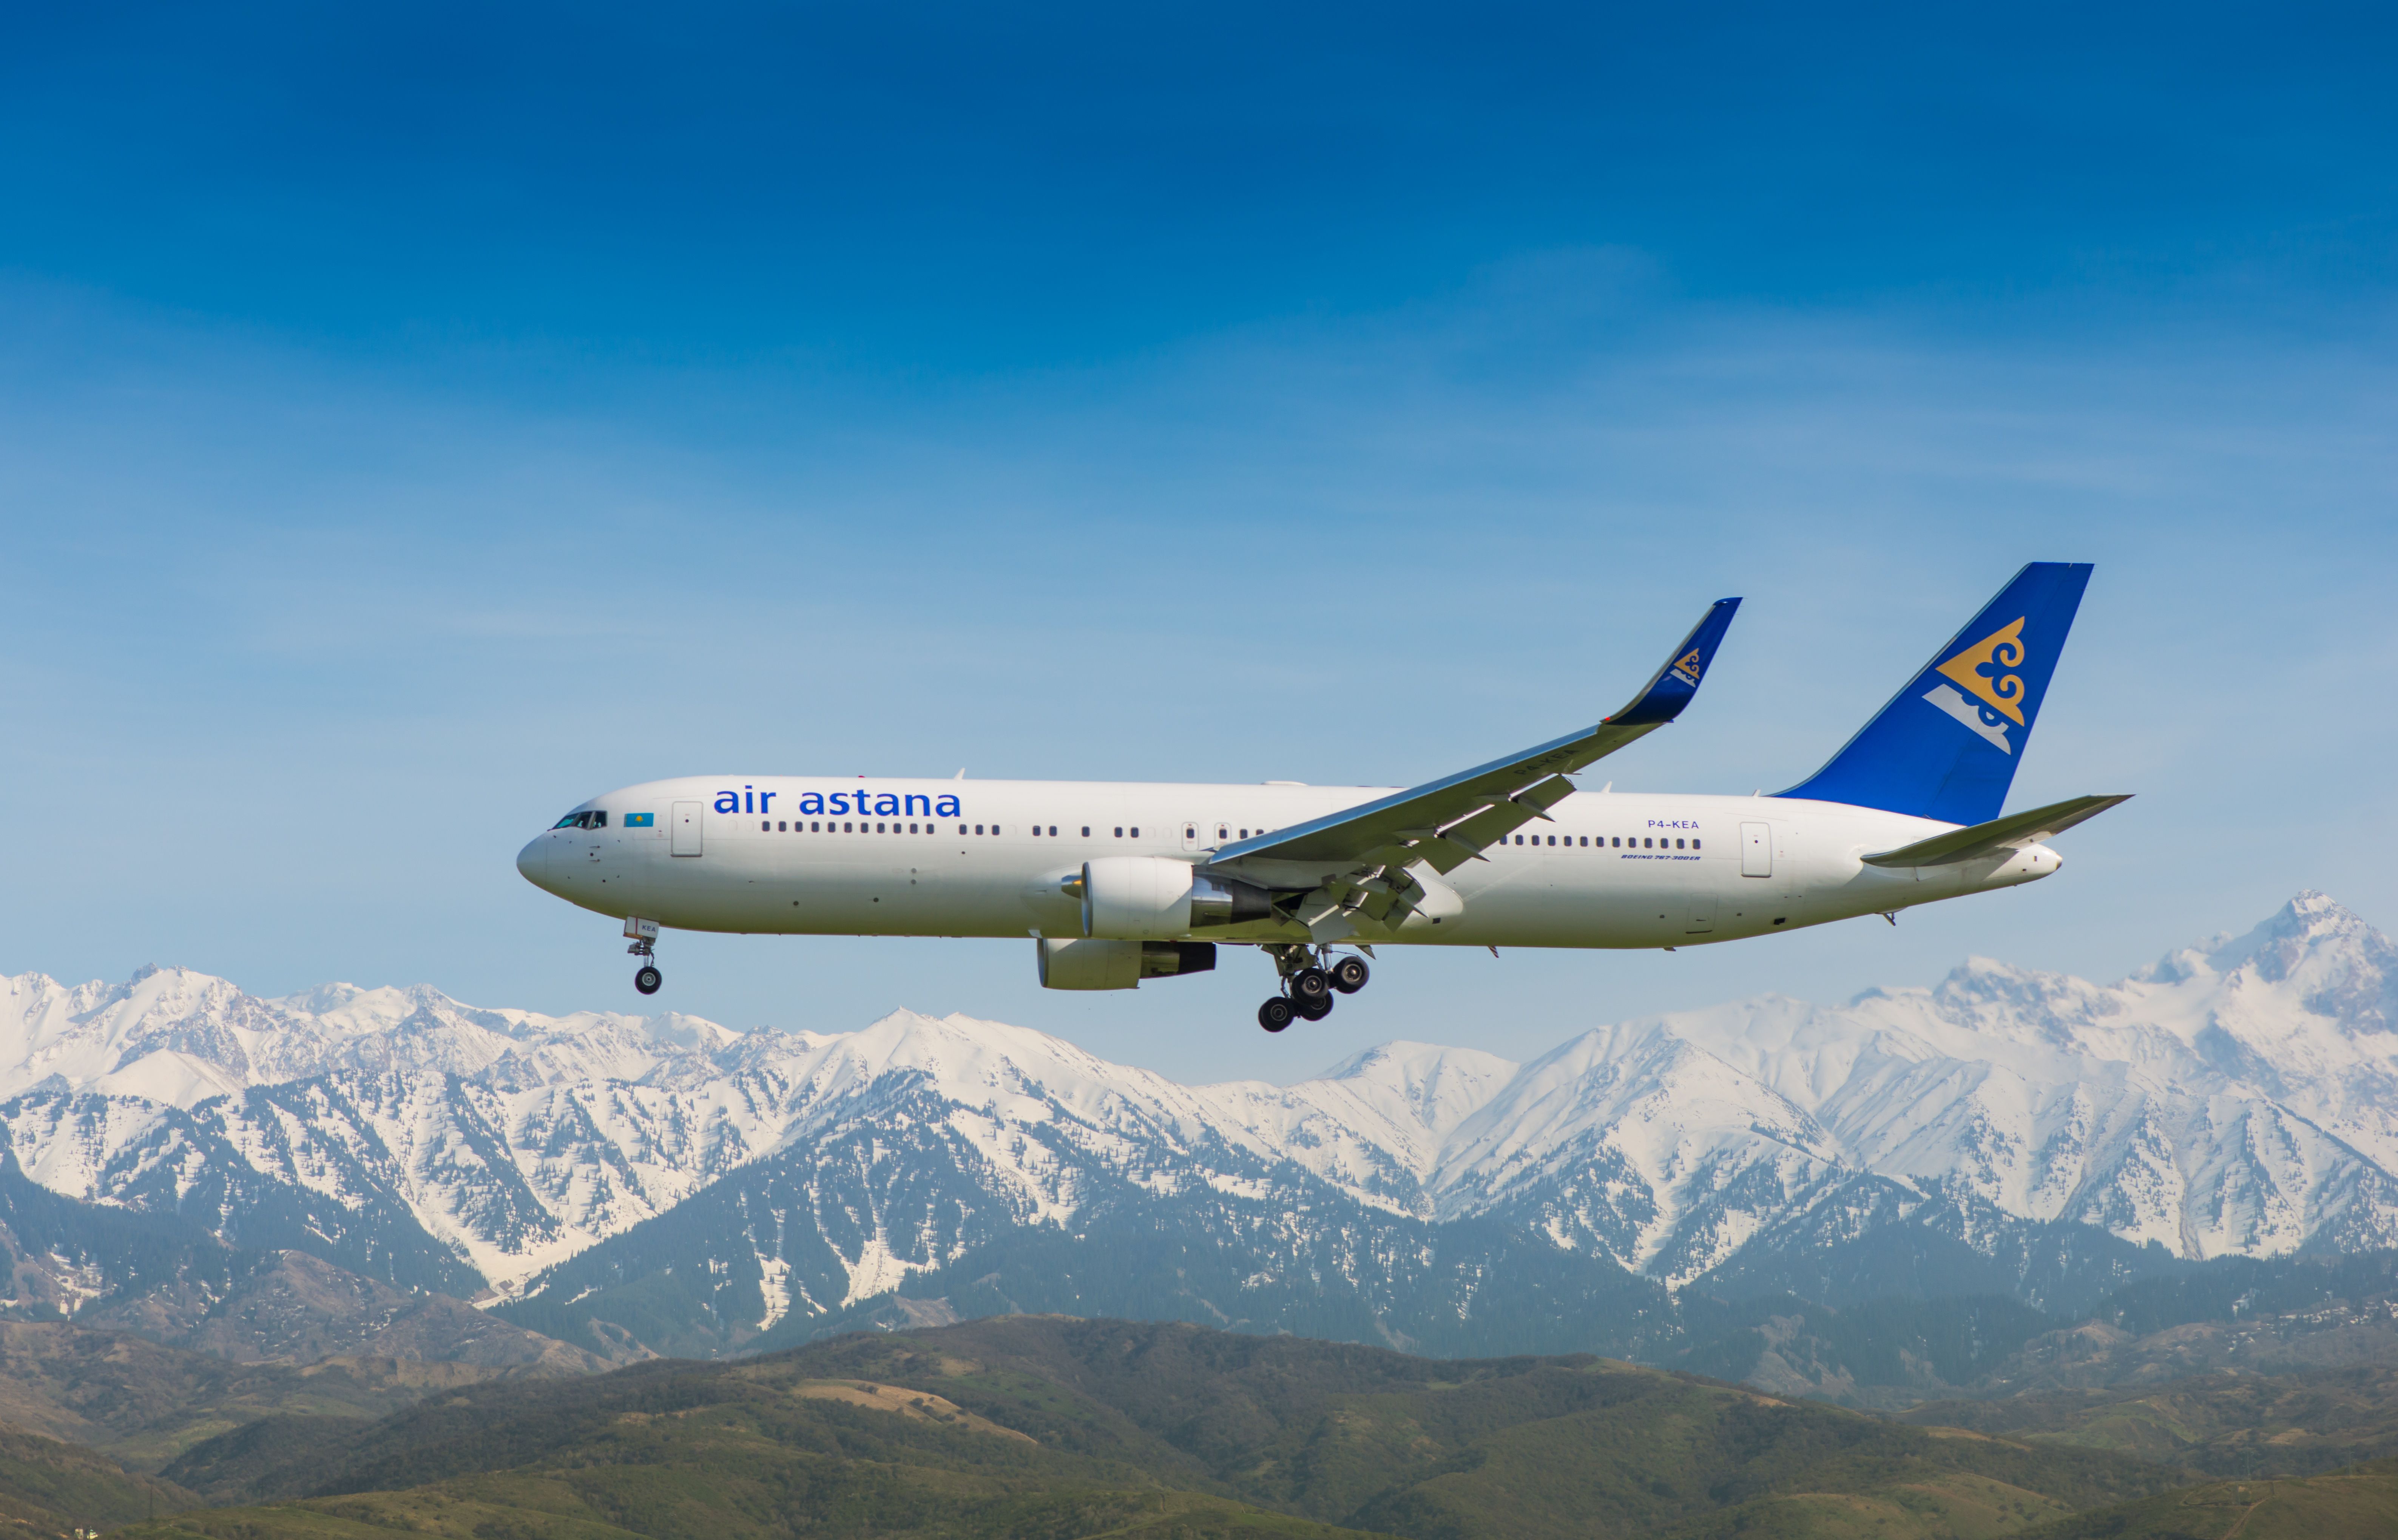 An Air Astana Boeing 767 is pictured flying past the mountains near Almaty, a city in the south of Kazakhstan.